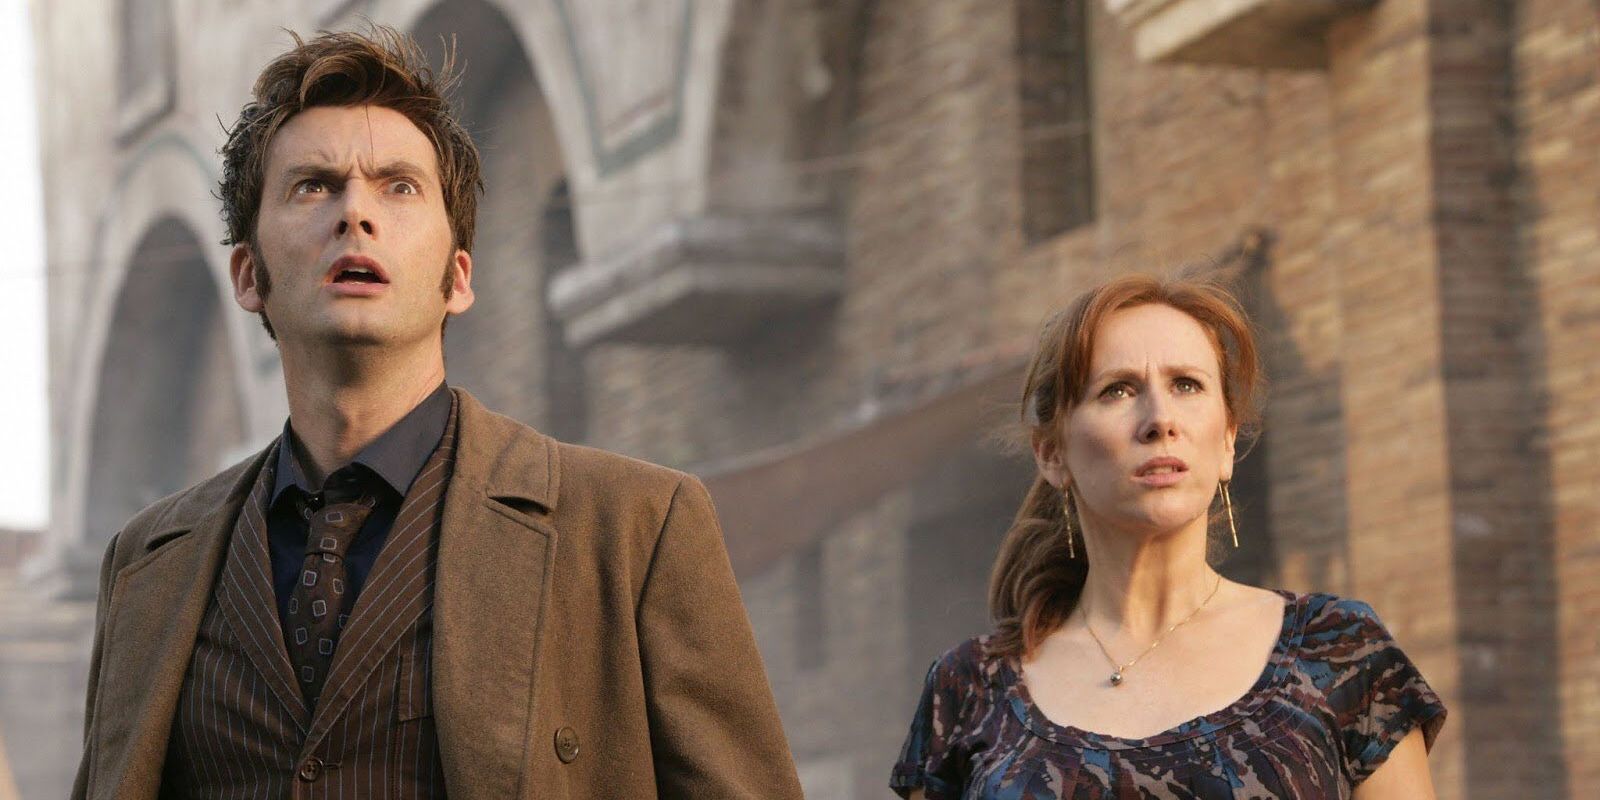 david-tennant-catherine-tate-as-tenth-doctor-and-donna-nobel-in-doctor-who.jpg